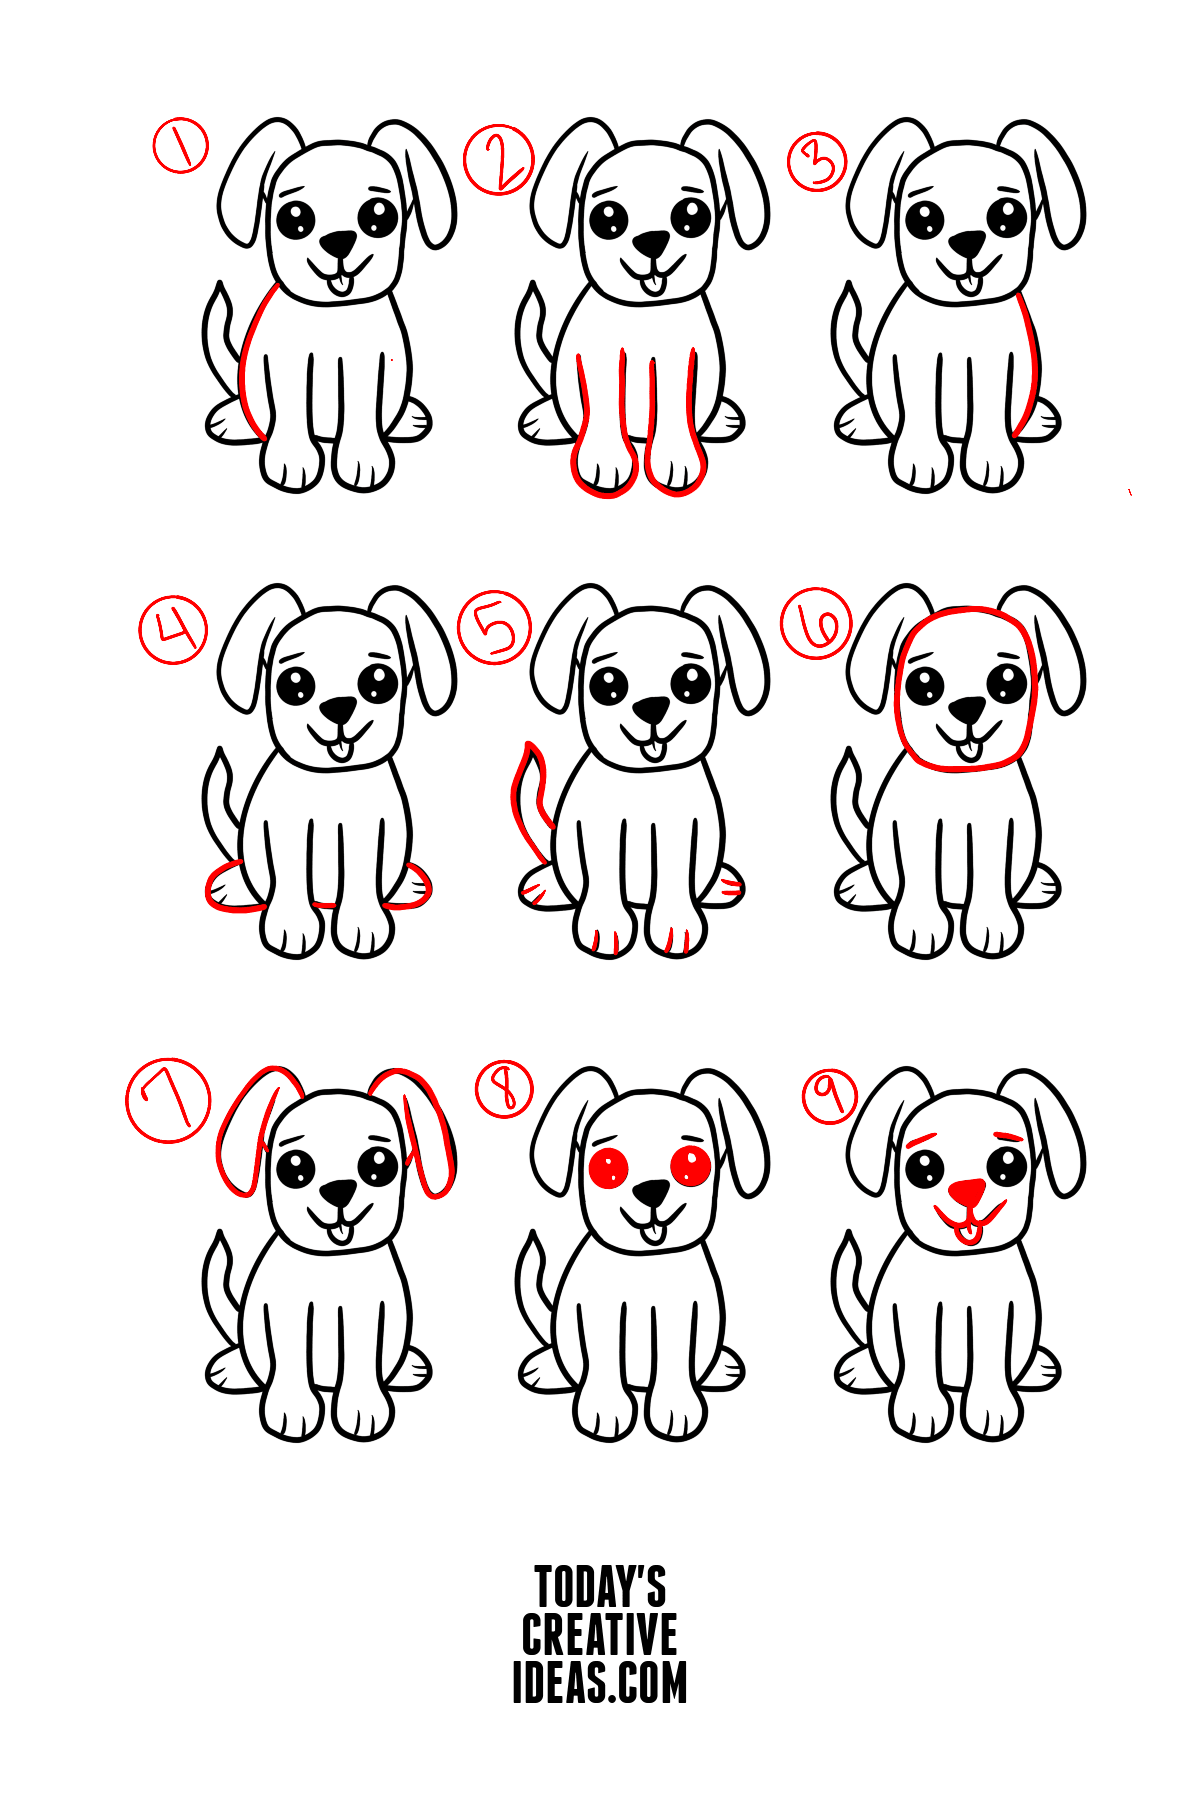 Step by Step Instructions on how to draw a dog.